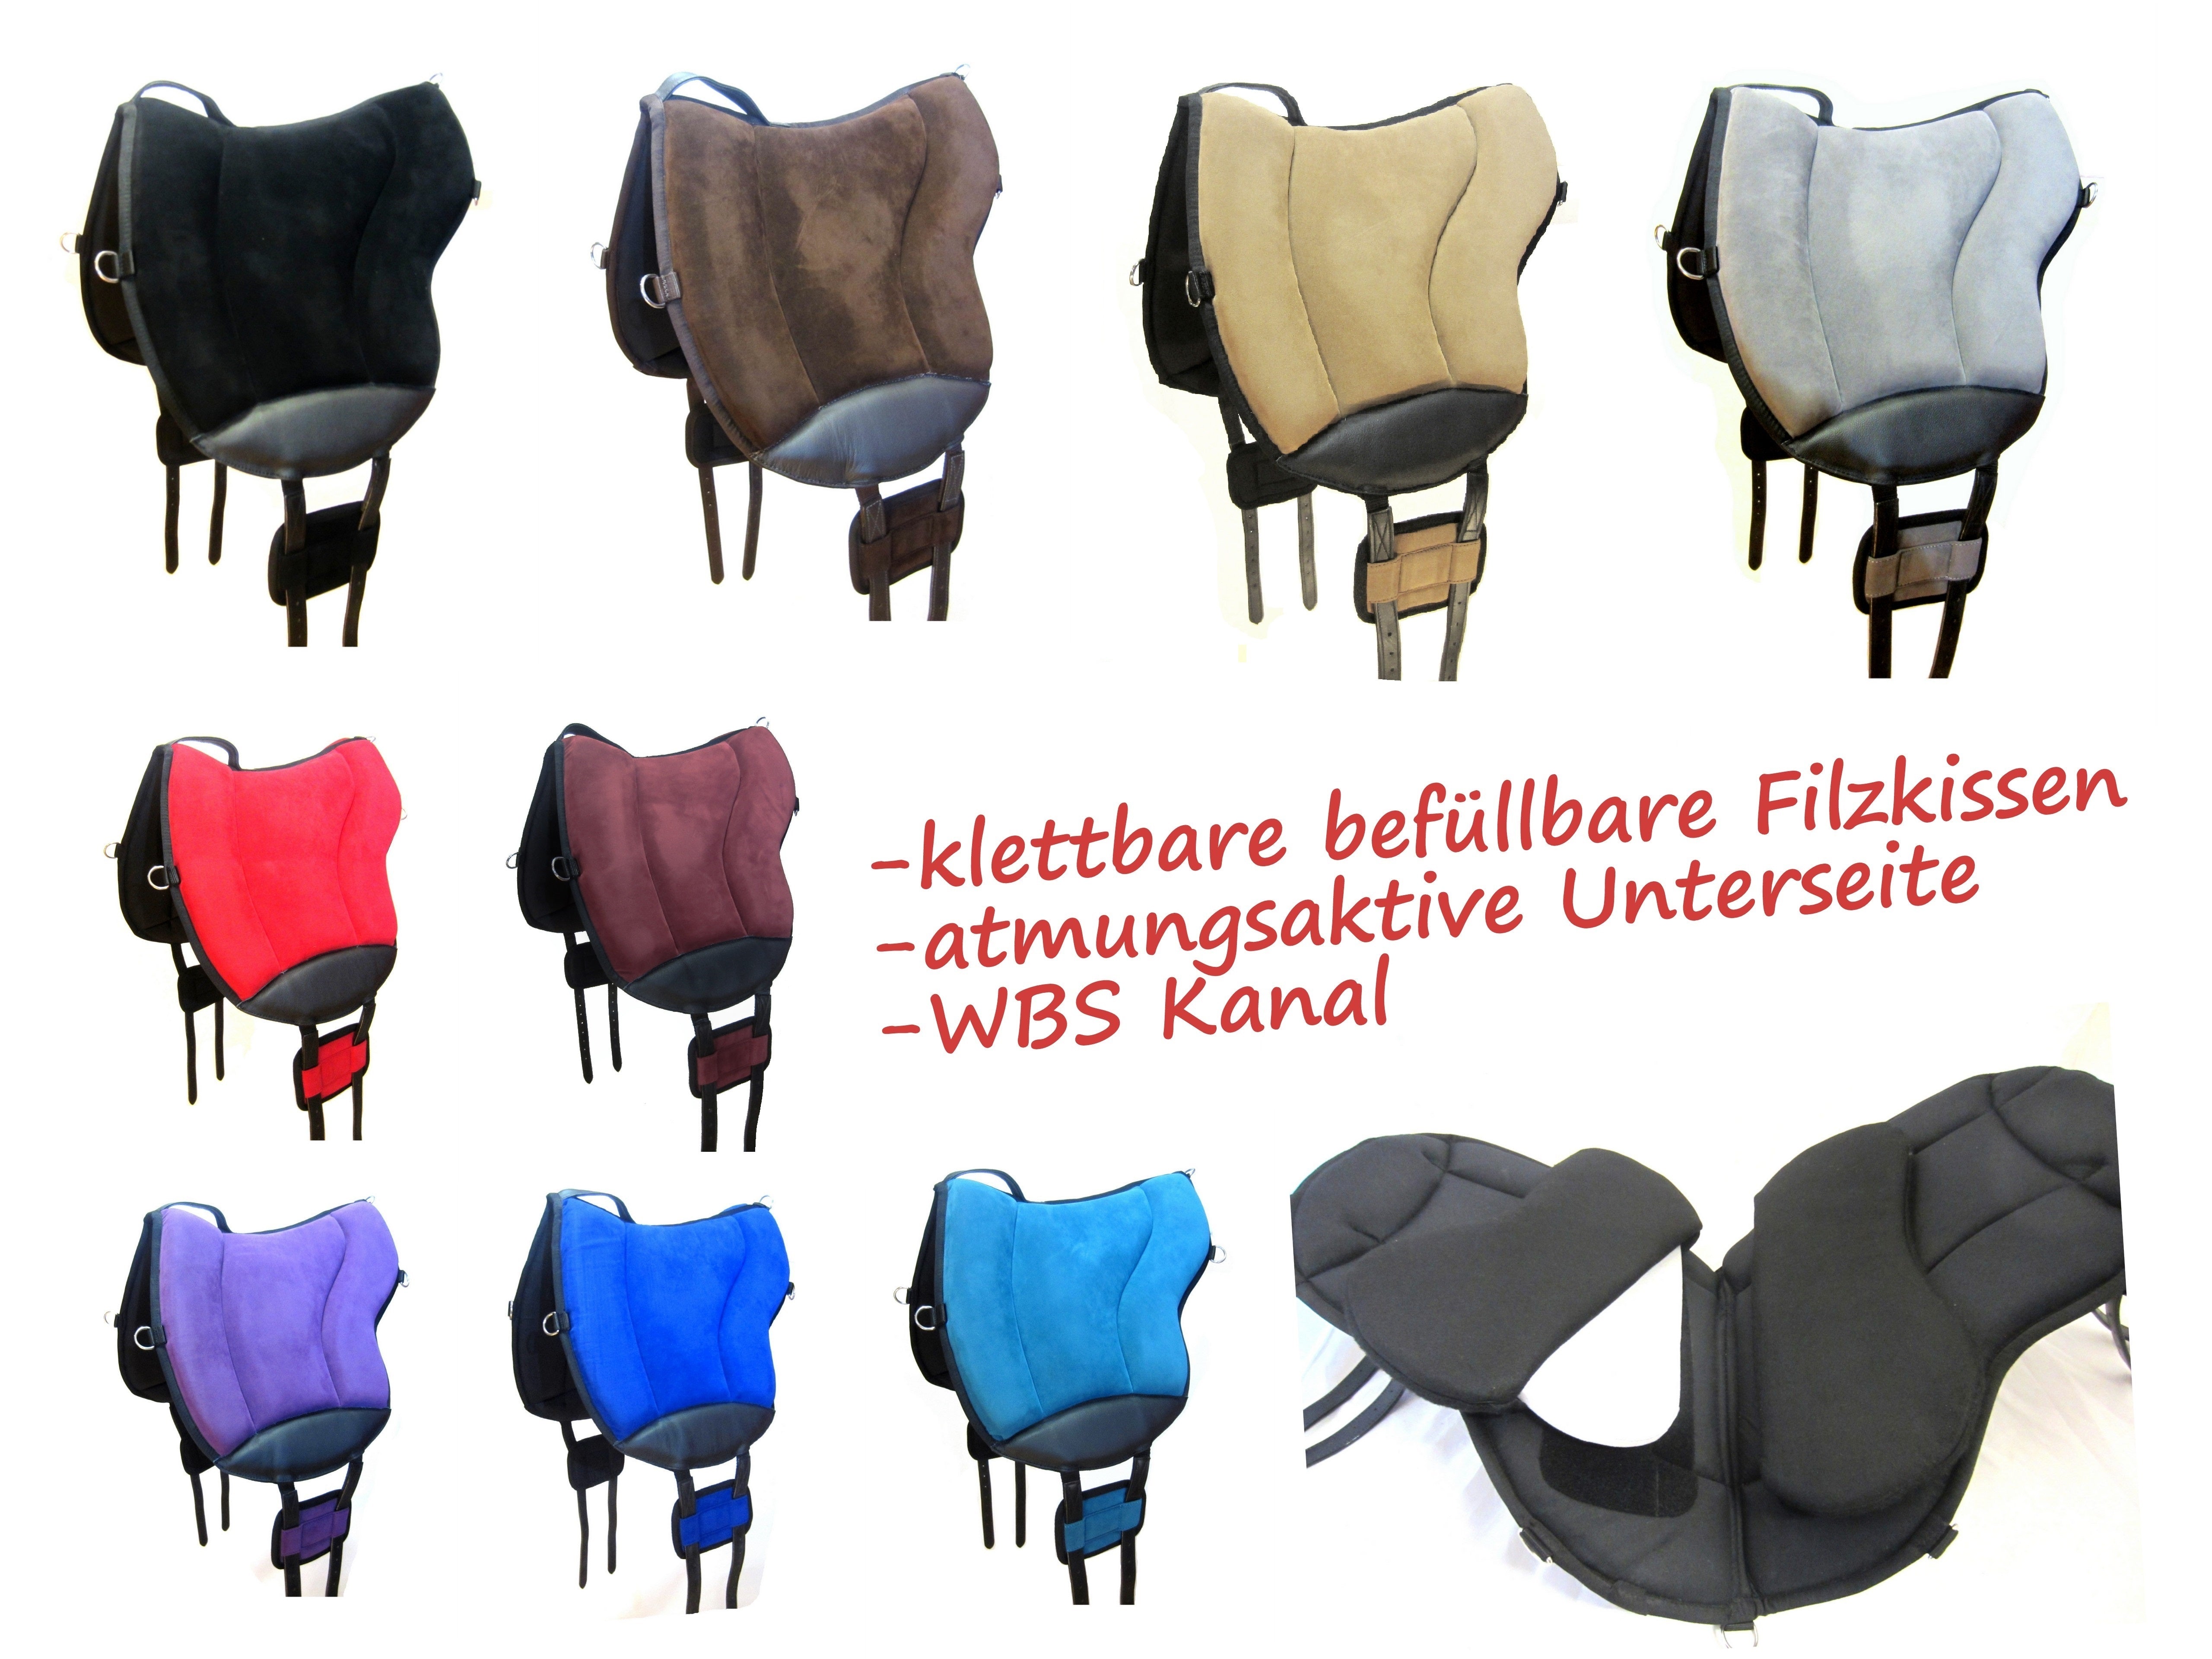 - SINGLE PIECES - Riding pad "ALIVIO" with WBS channel &amp; chamber structure with fillable felt cushions - velcro-